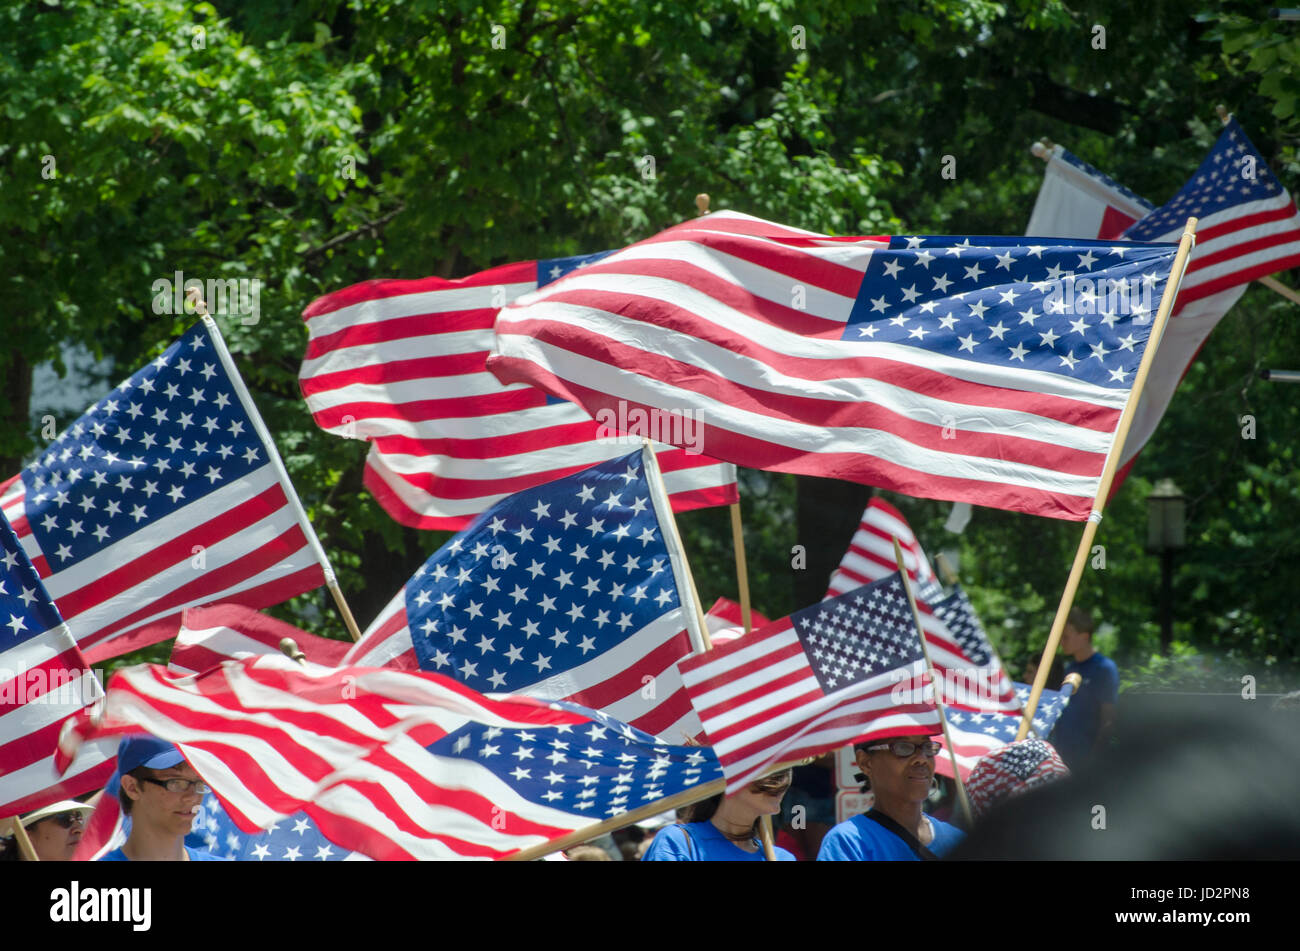 At the Independence Day parade, Consitution Ave NW, Washington DC, July 4, 2014. Stock Photo